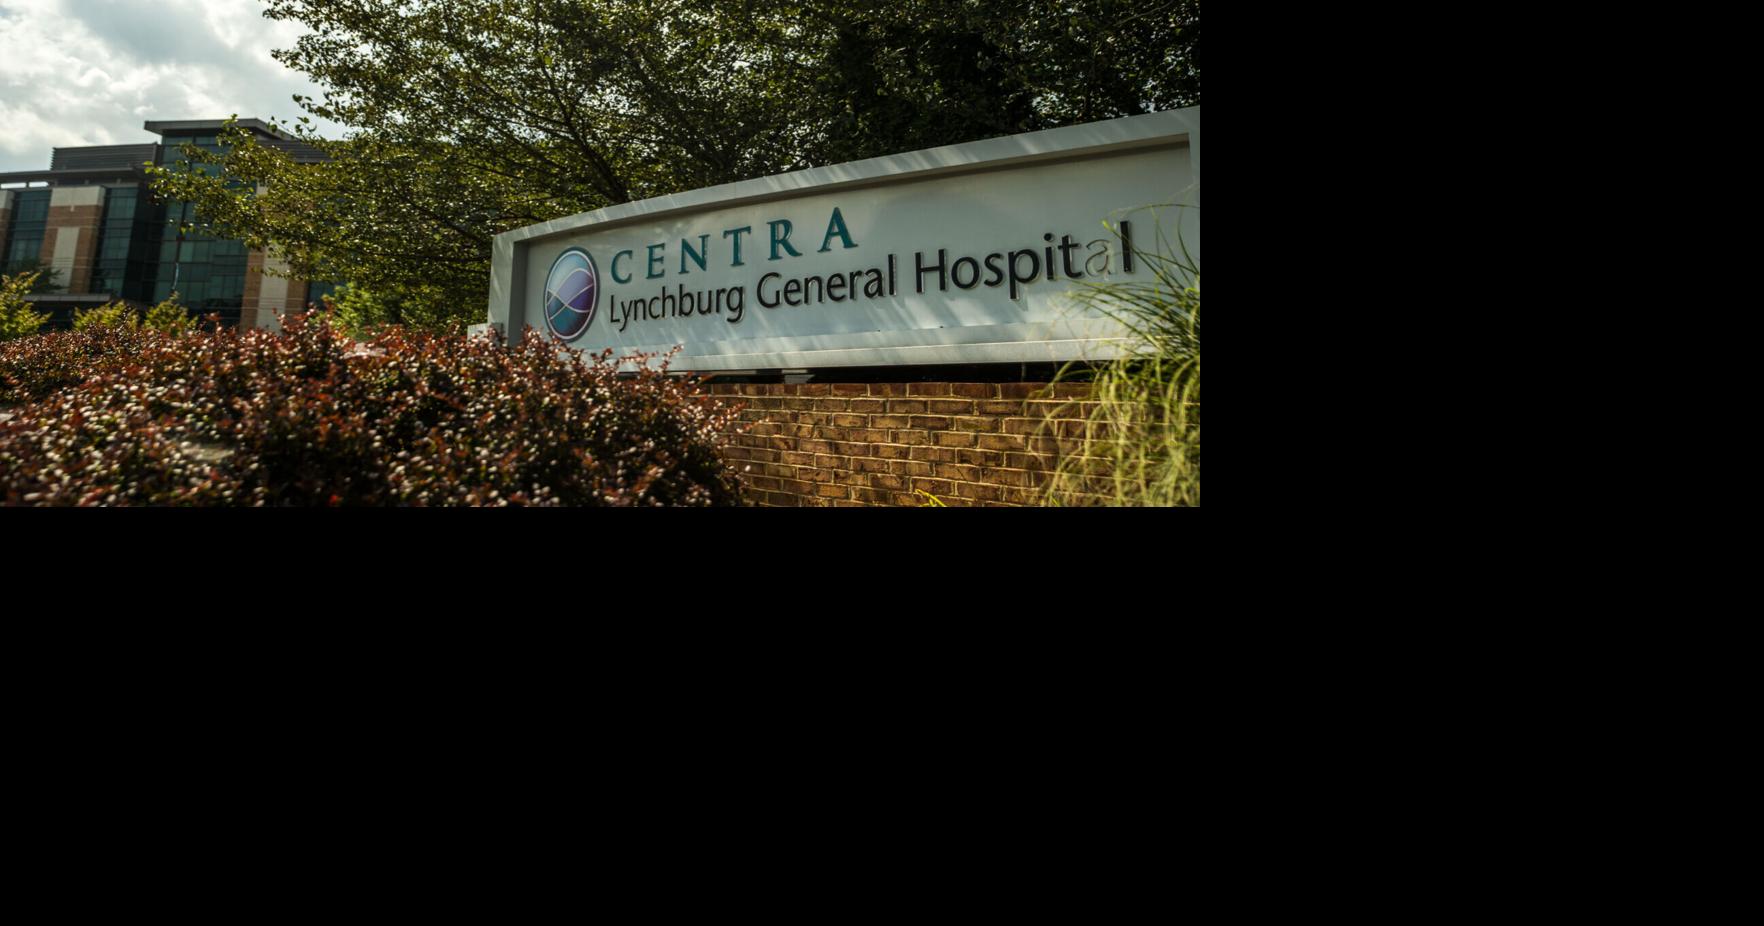 The Centra program improves patient care with advanced technology